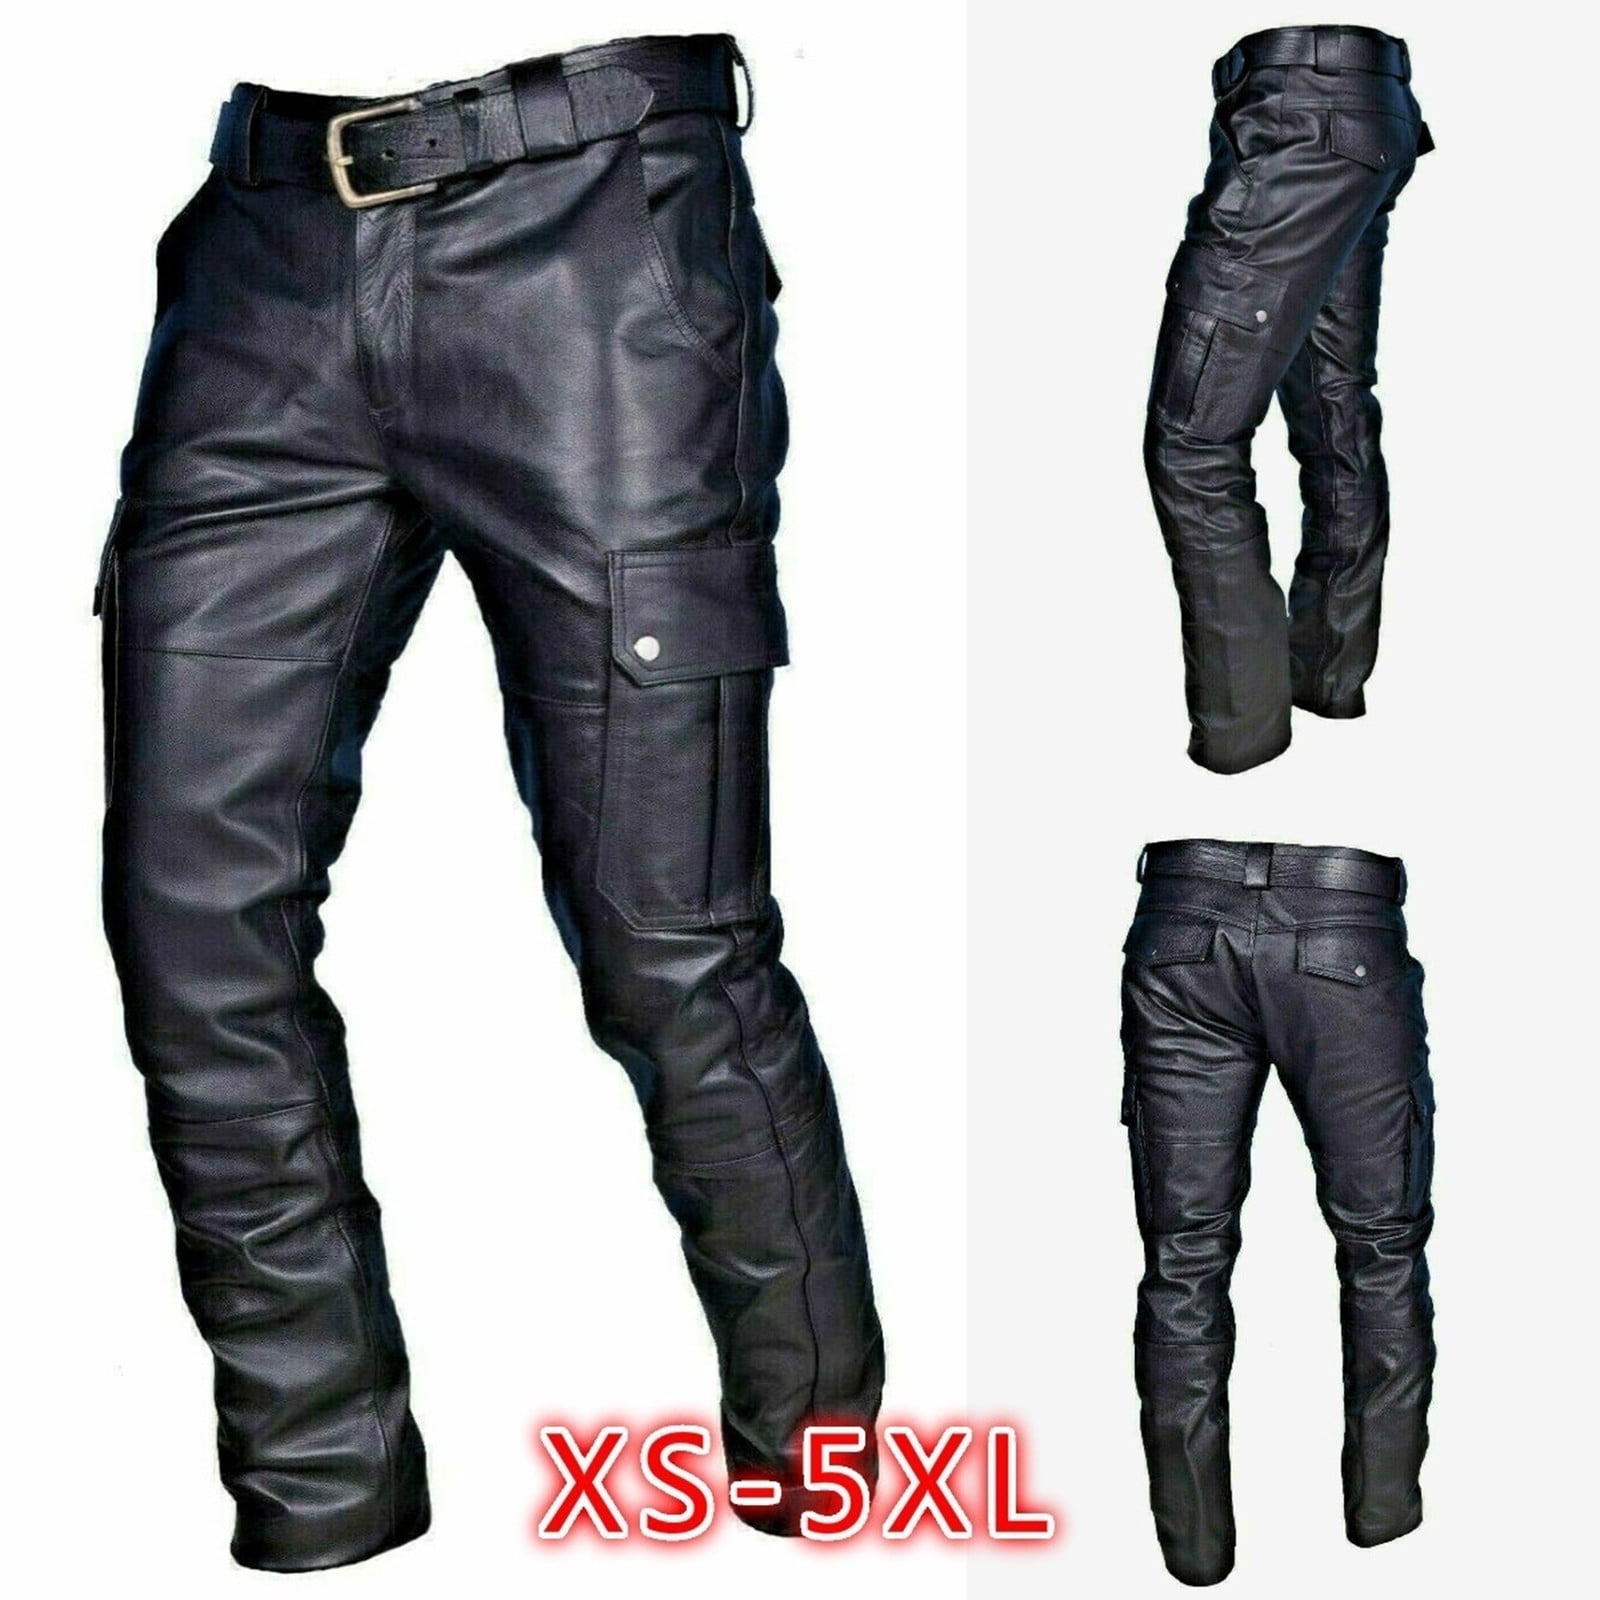 Mens Motorcycle Black Leather Pants Jeans Style Motorcycle Riding